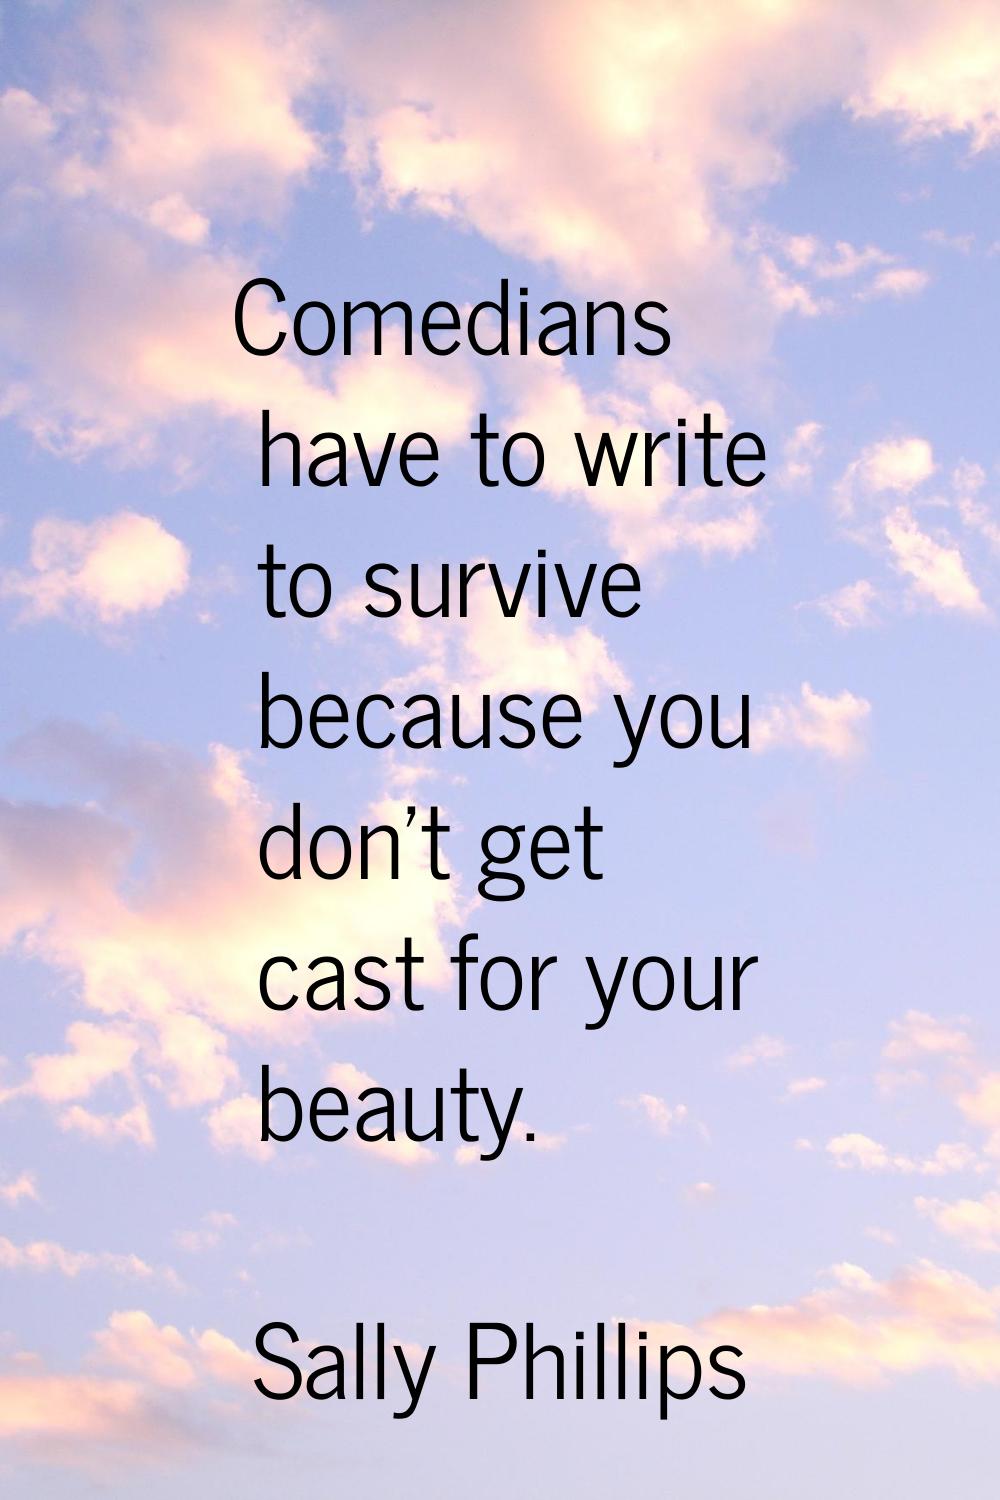 Comedians have to write to survive because you don't get cast for your beauty.